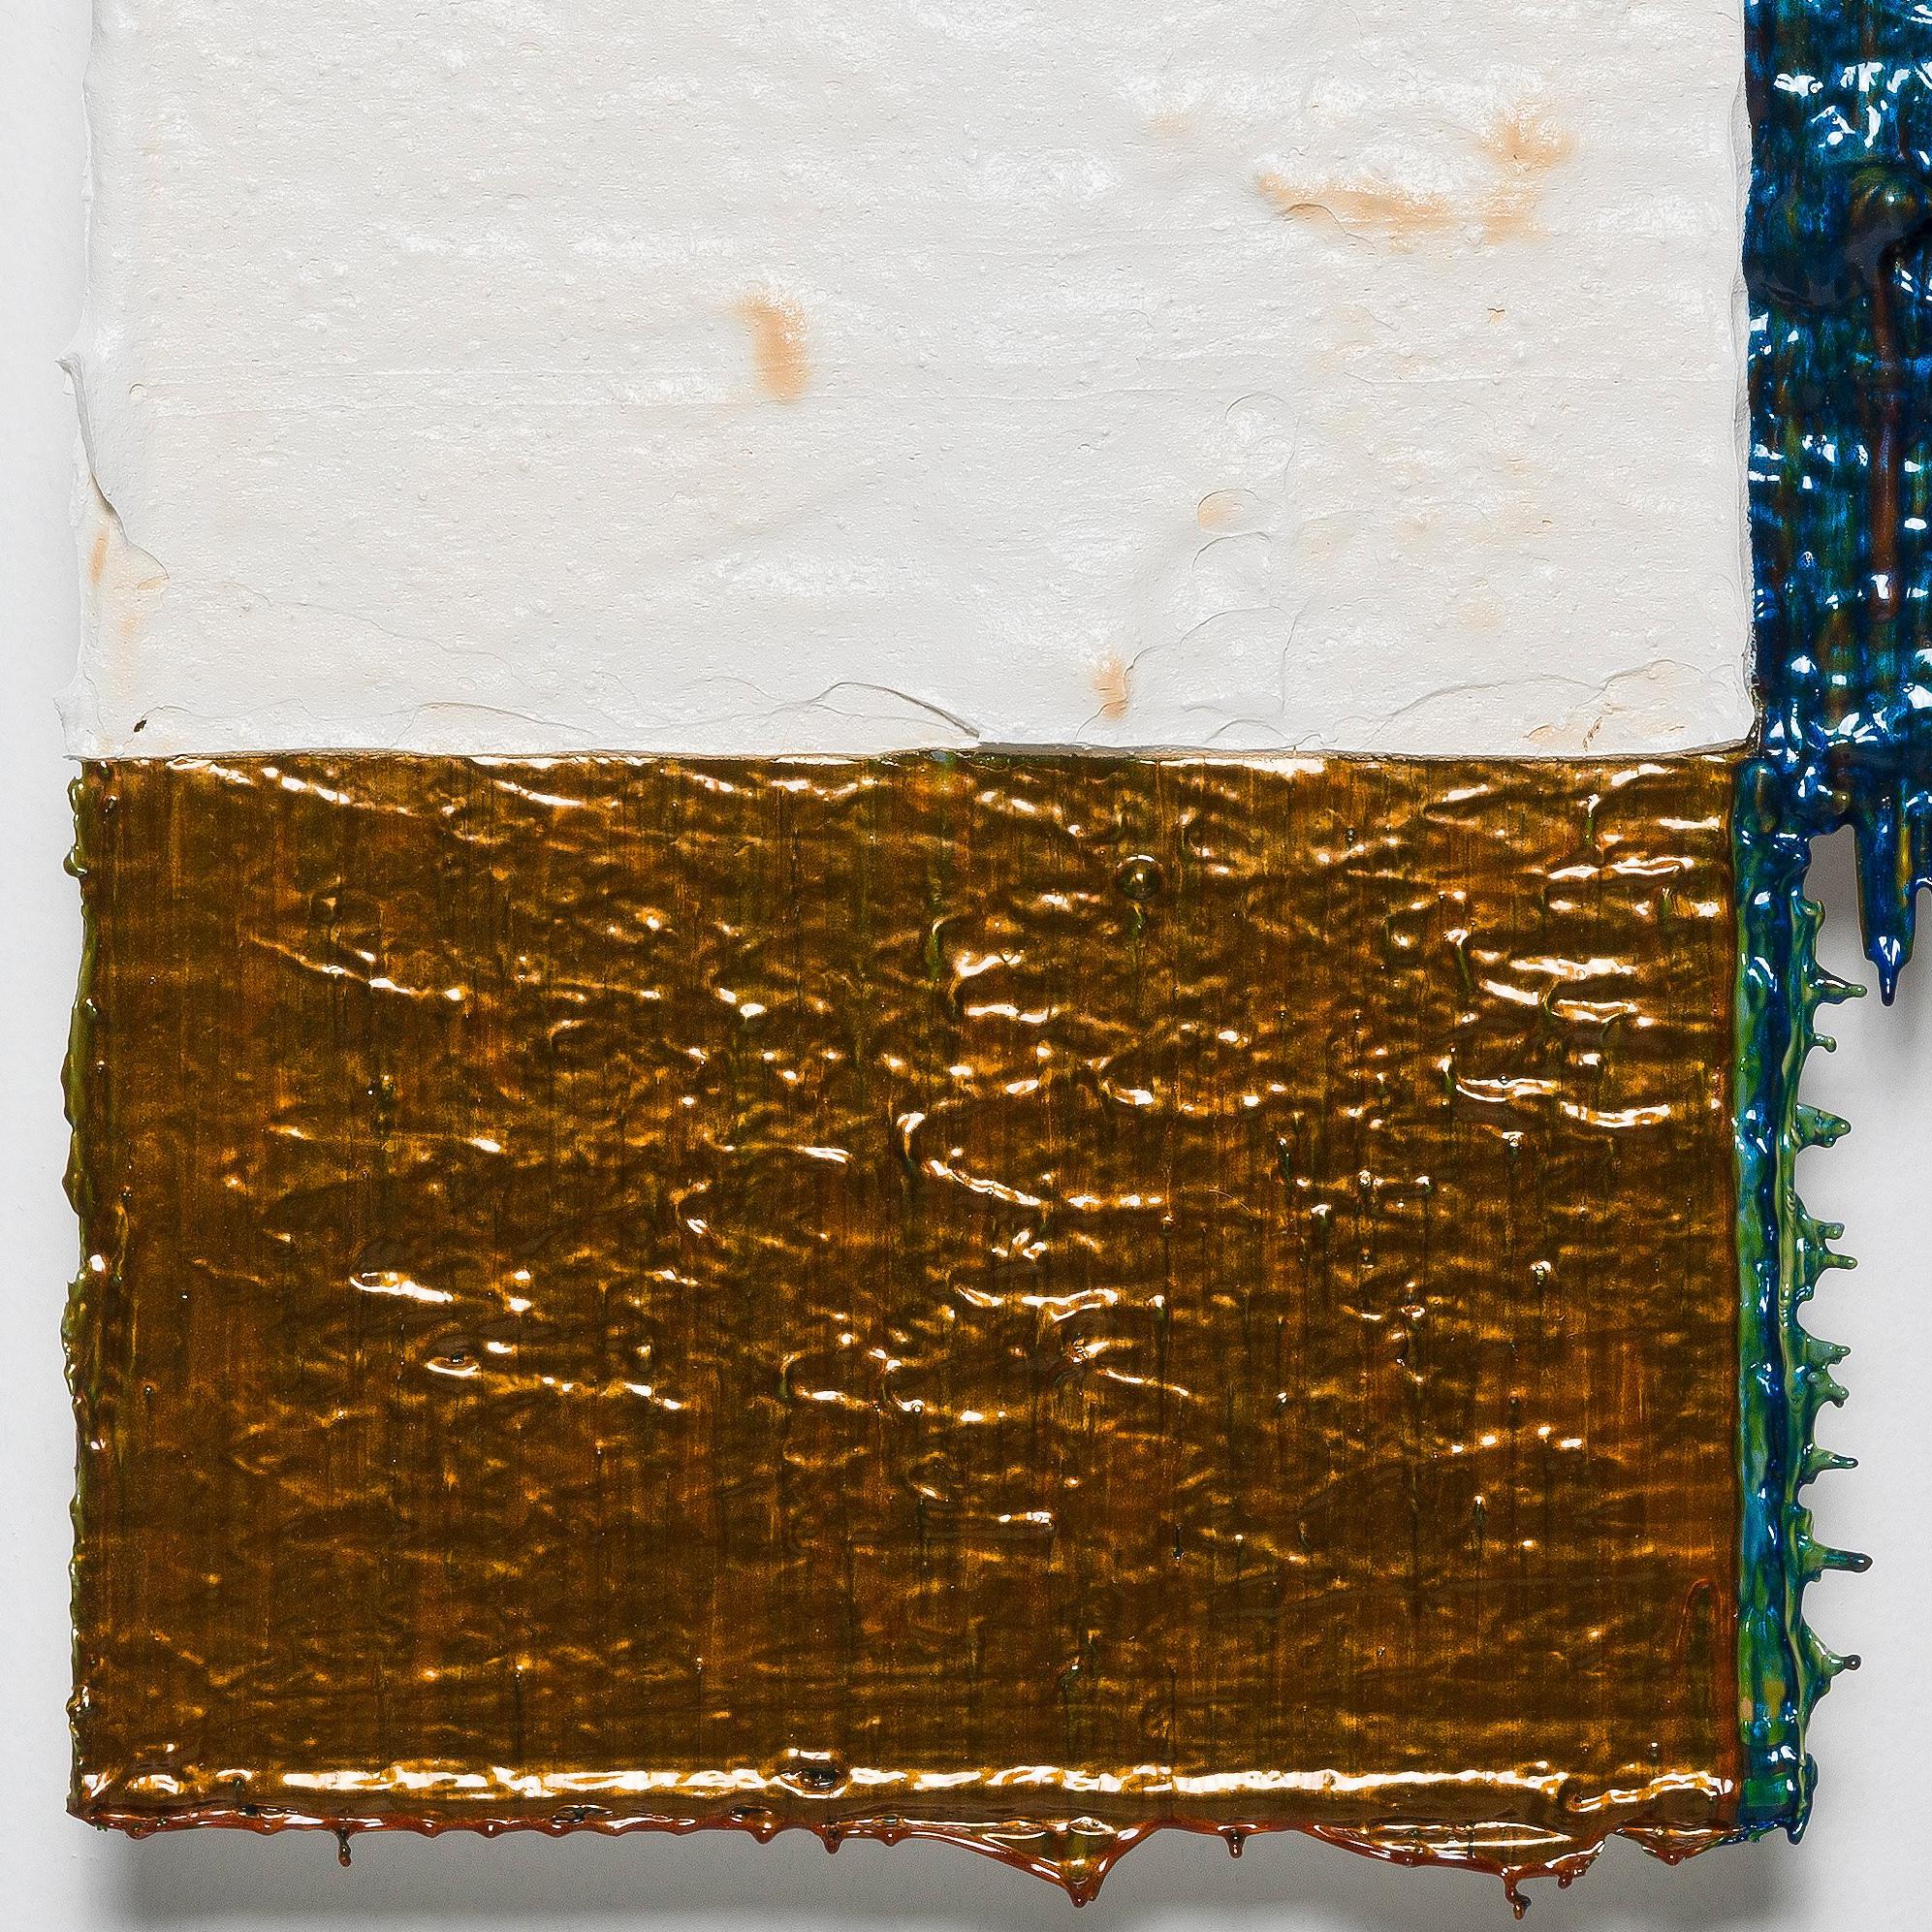 Joseph Cohen’s two-dimensional Propositions provide a contemporary take on the traditional field of painting, and its possibilities for transformation. Layering and a mix of commonplace and precious materials is a key factor in Cohen’s desire to